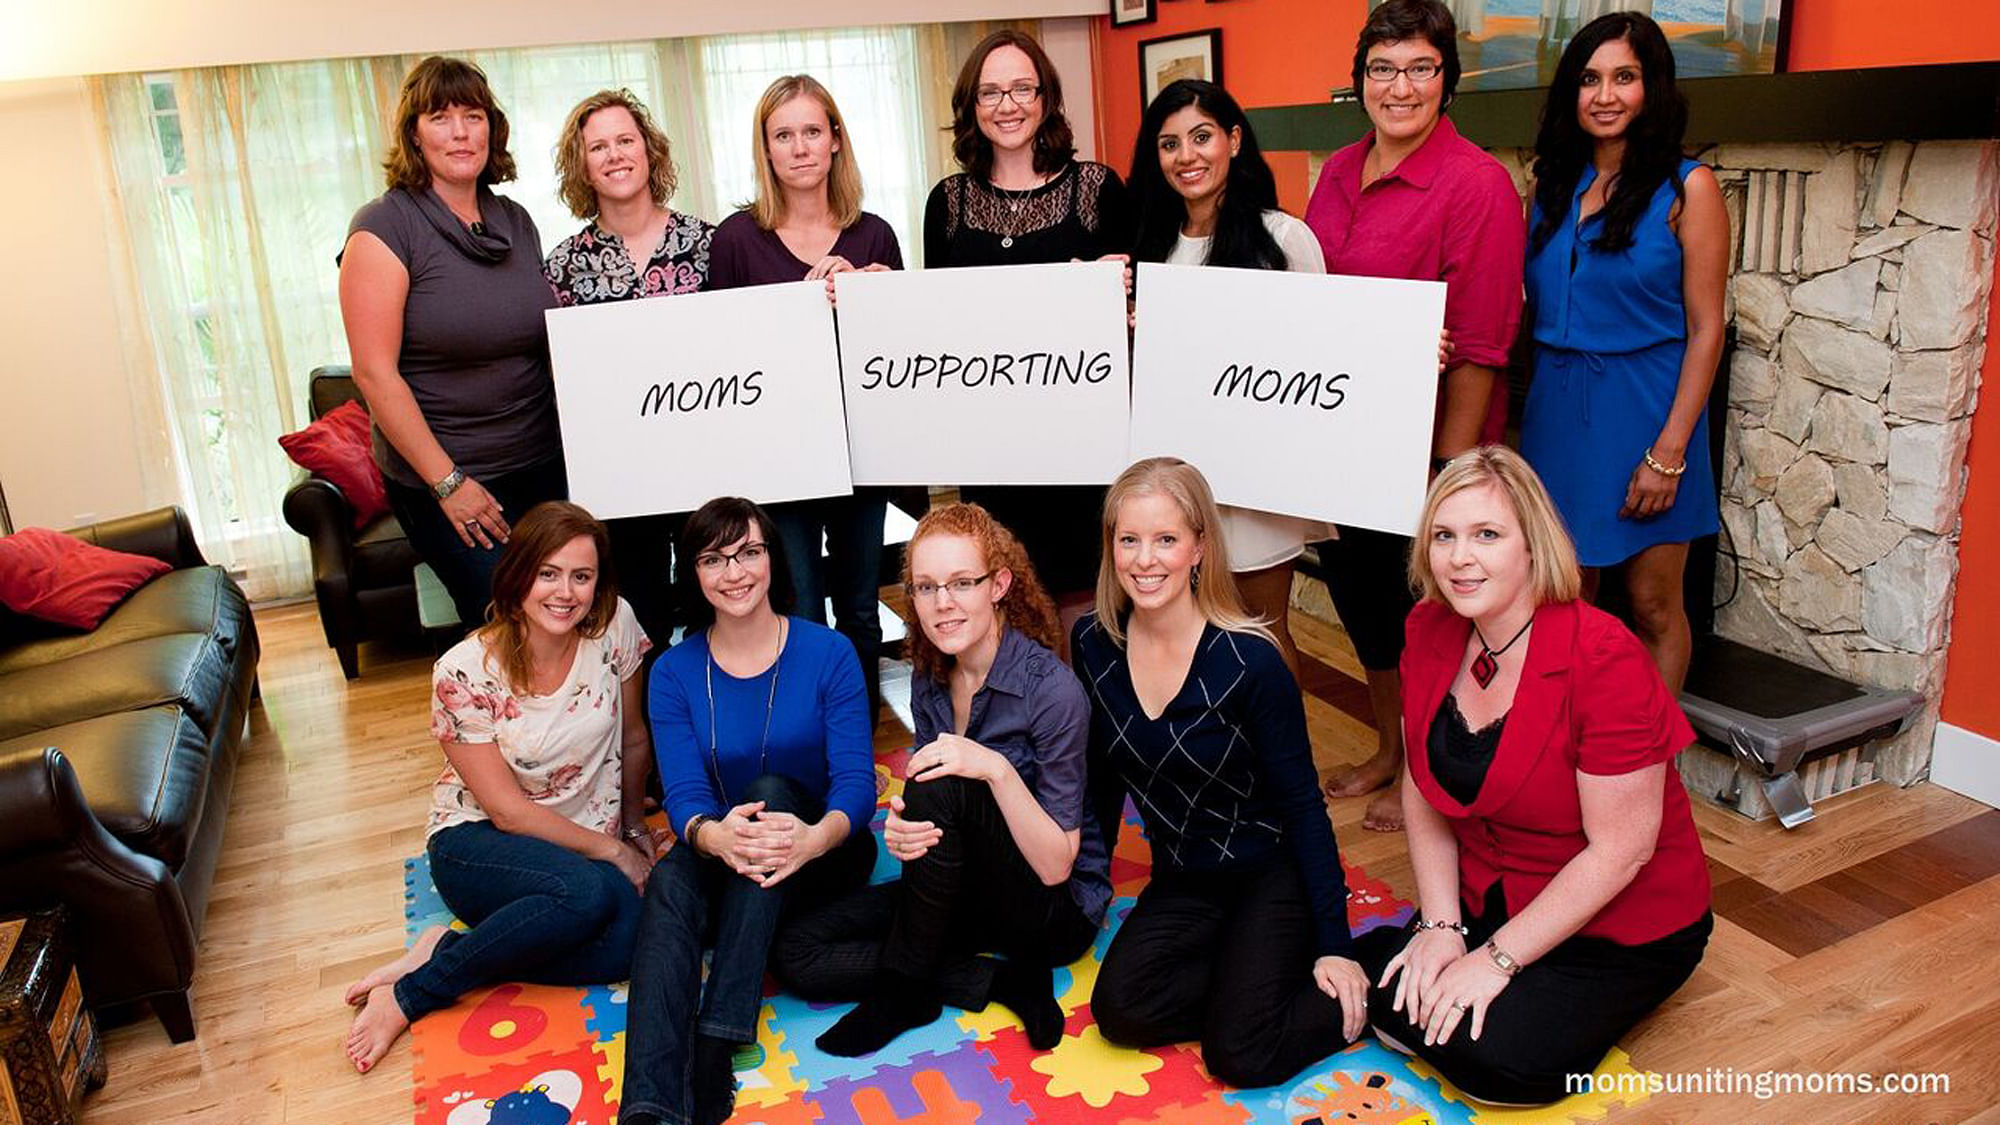 Mommies are suddenly uniting to end unnecessary mommy wars. (Photo Courtesy: Vivian Kereki and <a href="http://momsunitingmoms.com/">Moms Uniting Moms</a>)